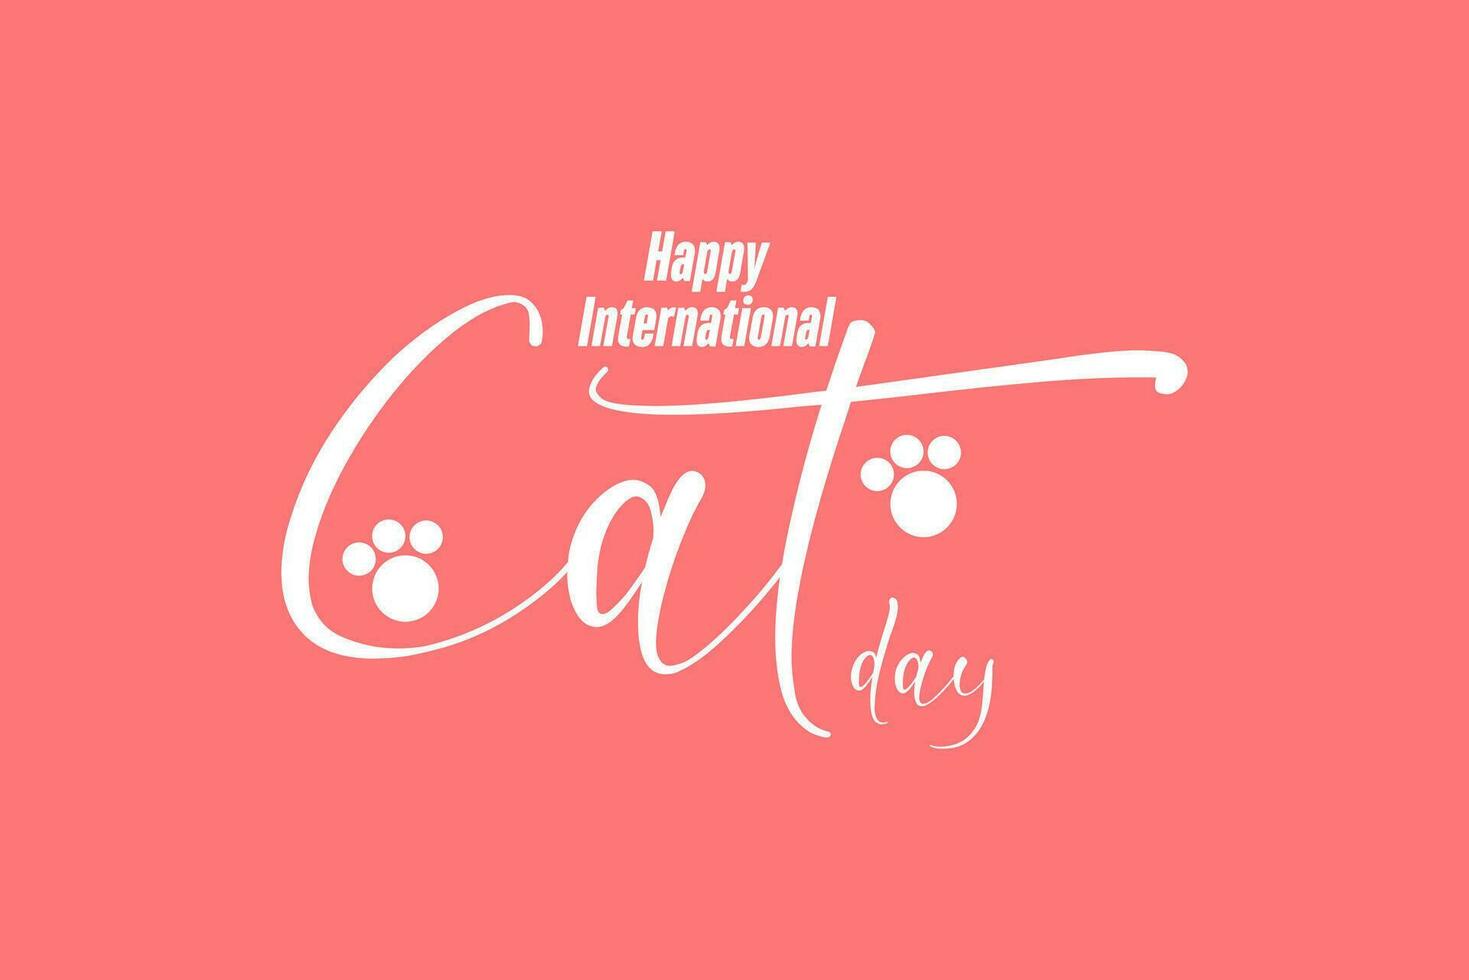 Happy International Cat Day, background template Holiday concept vector